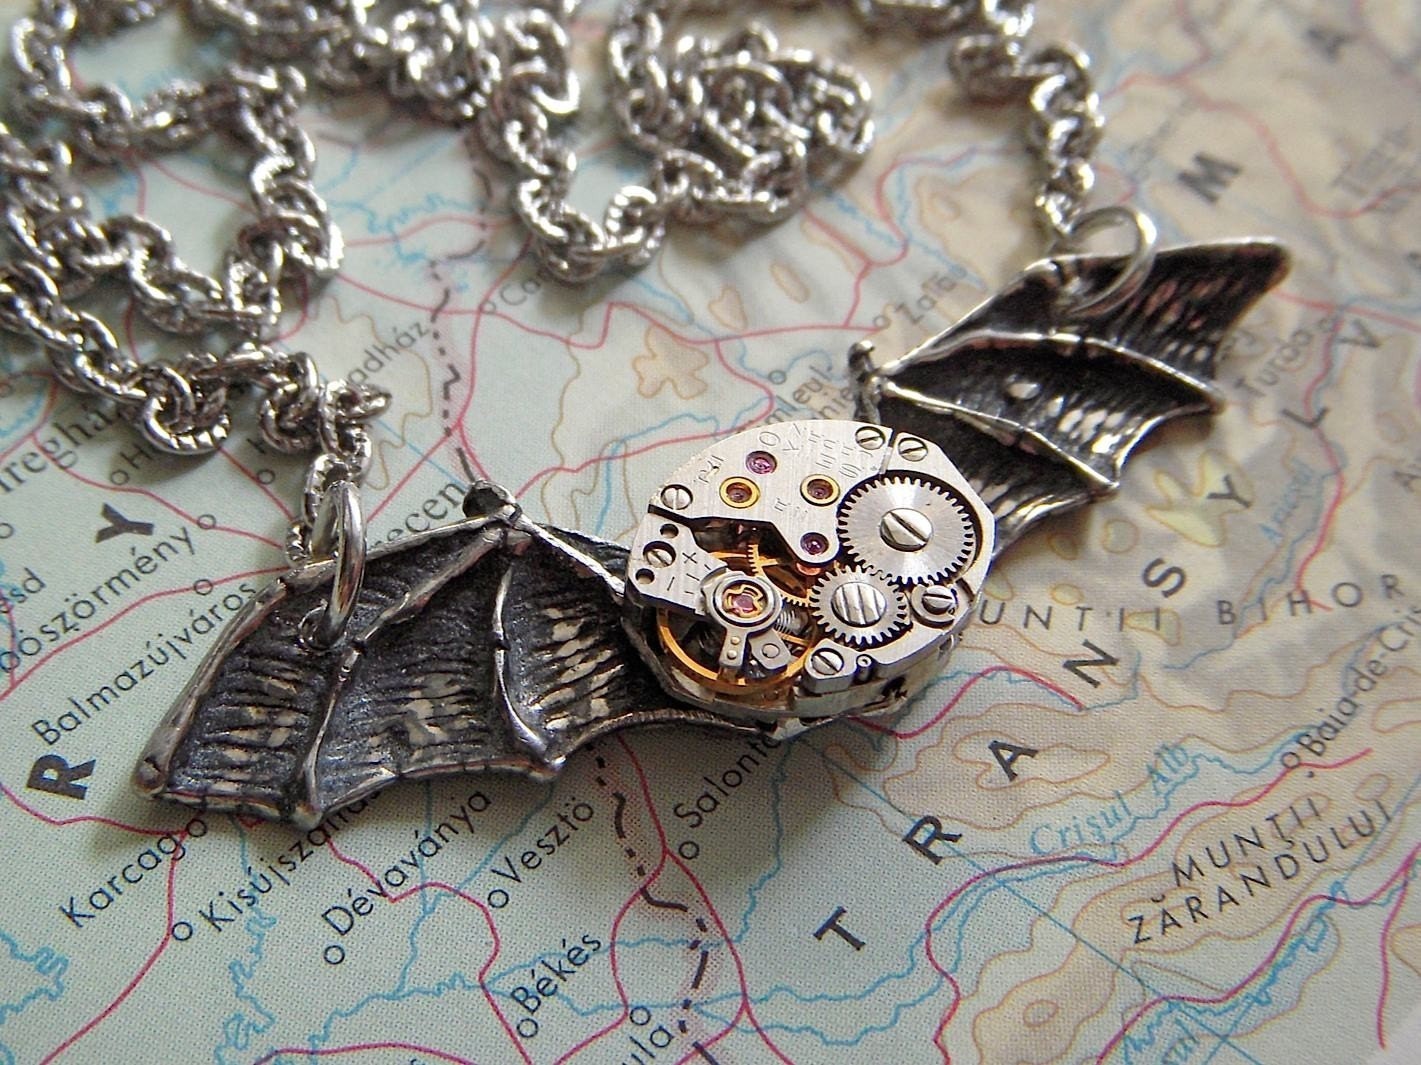 Steampunk Necklace COSMIC BAT WINGS - Gothic Victorian Noir Style - Vintage Watch Movement Silver Plated Chain - Original Design from Cosmic Firefly